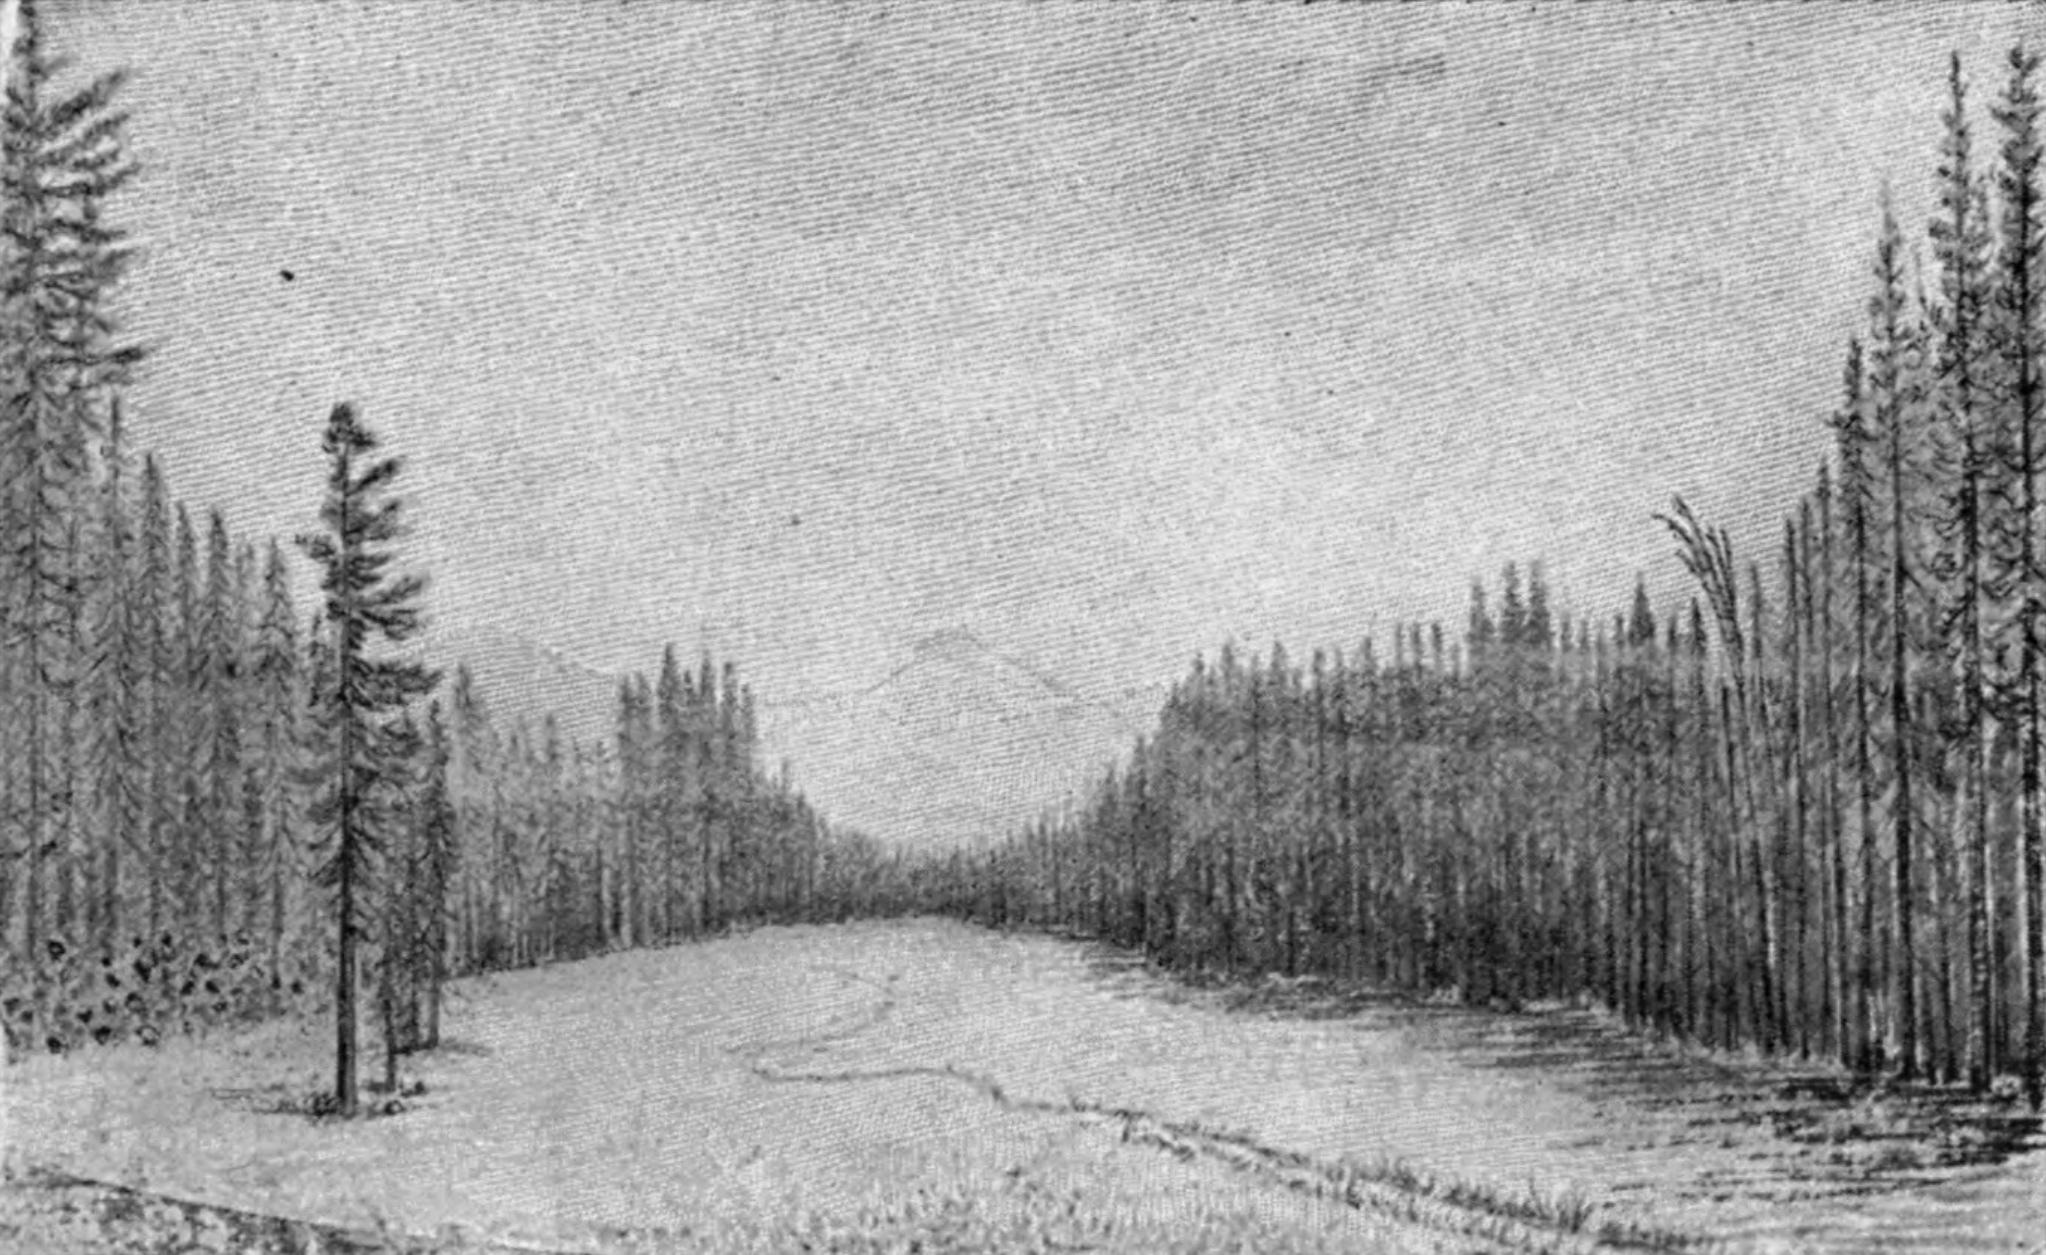 A sketch of a long, oval-shaped glacial meadow that is surrounded by a thick stand of evergreens. In the foreground sit several boulders and a downed tree trunk.